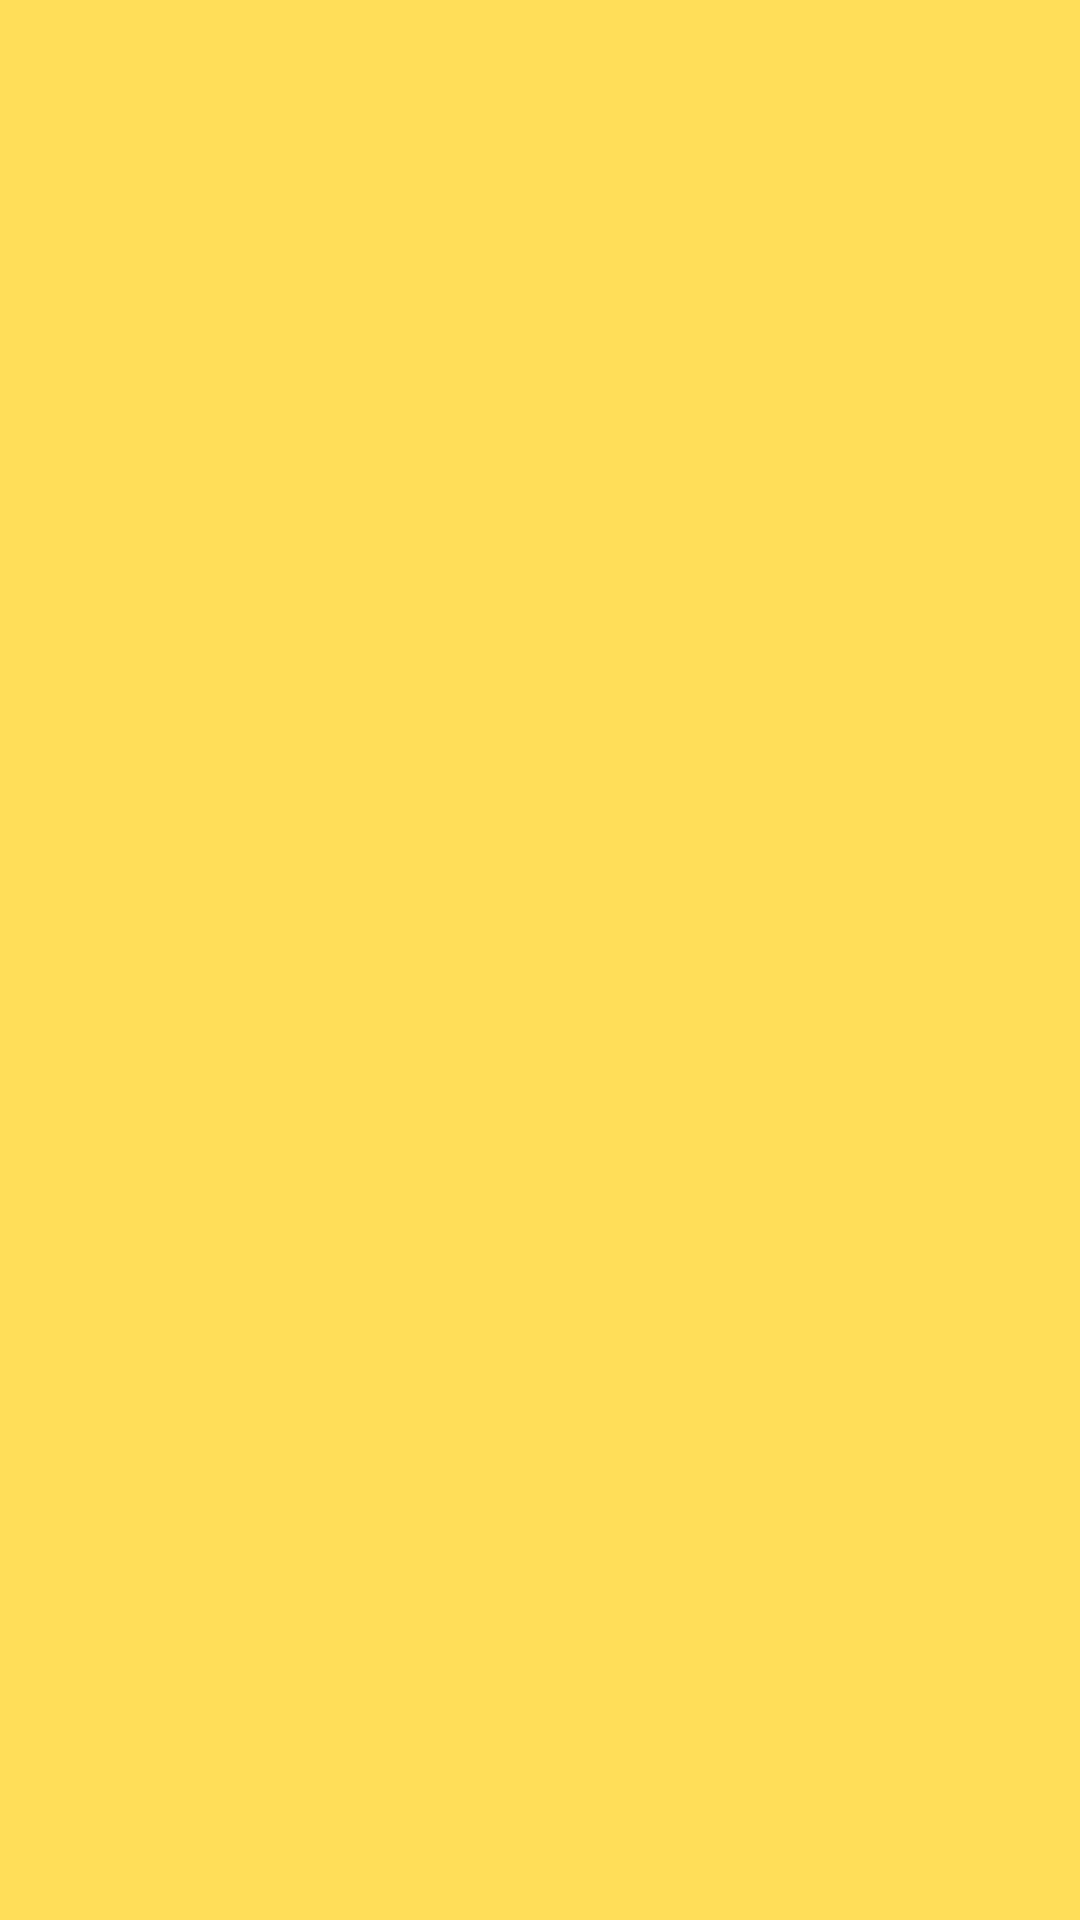 Plain Solid Yellow Background